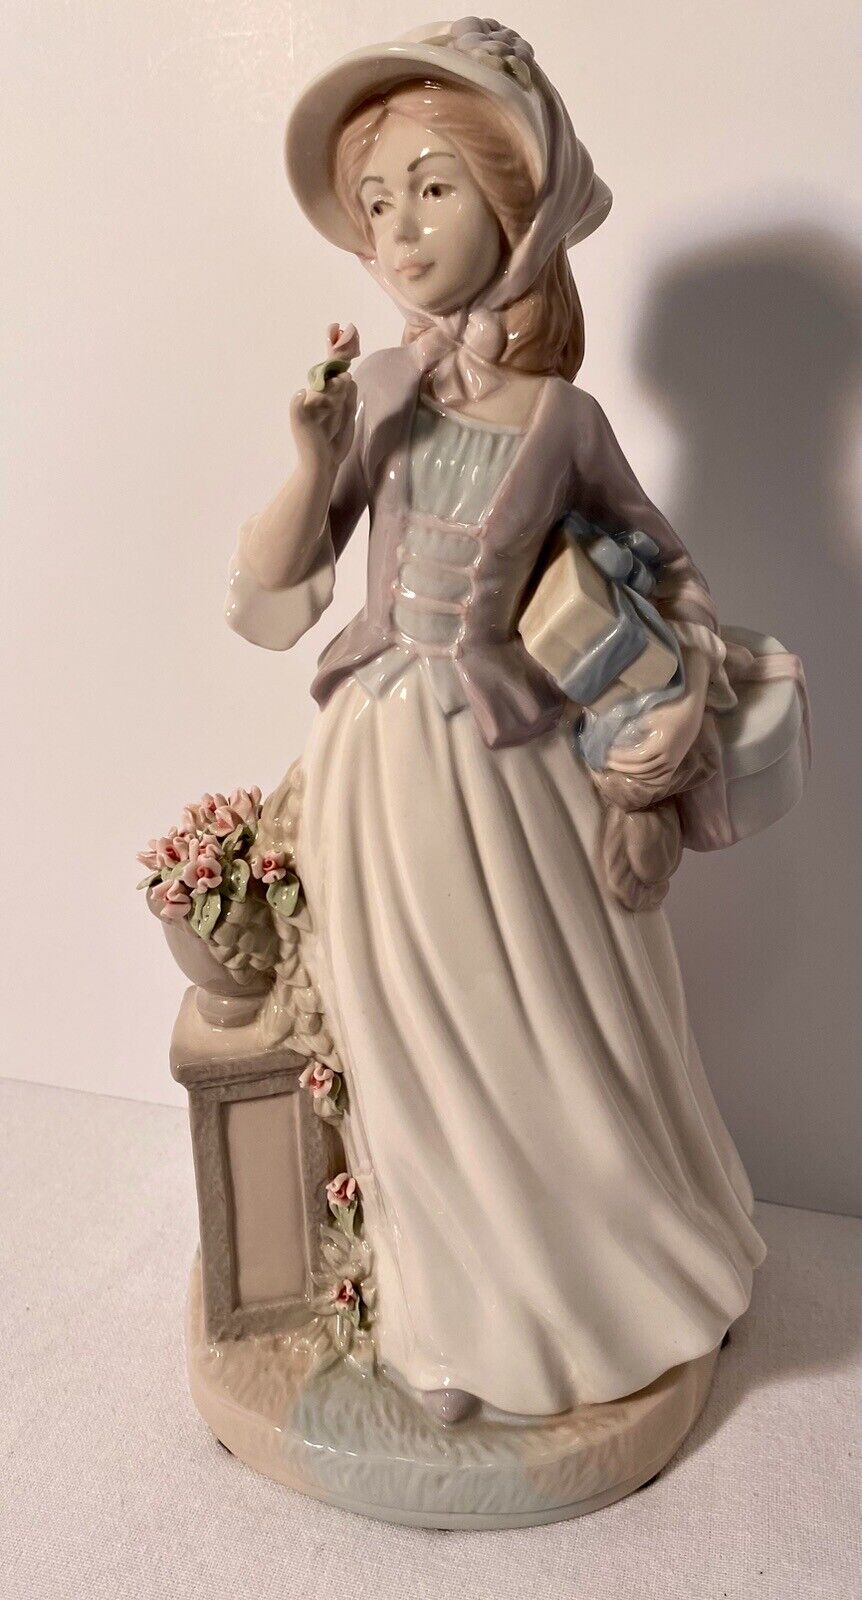 12.5 NADAL LLADRO LADY In Excellent Condition